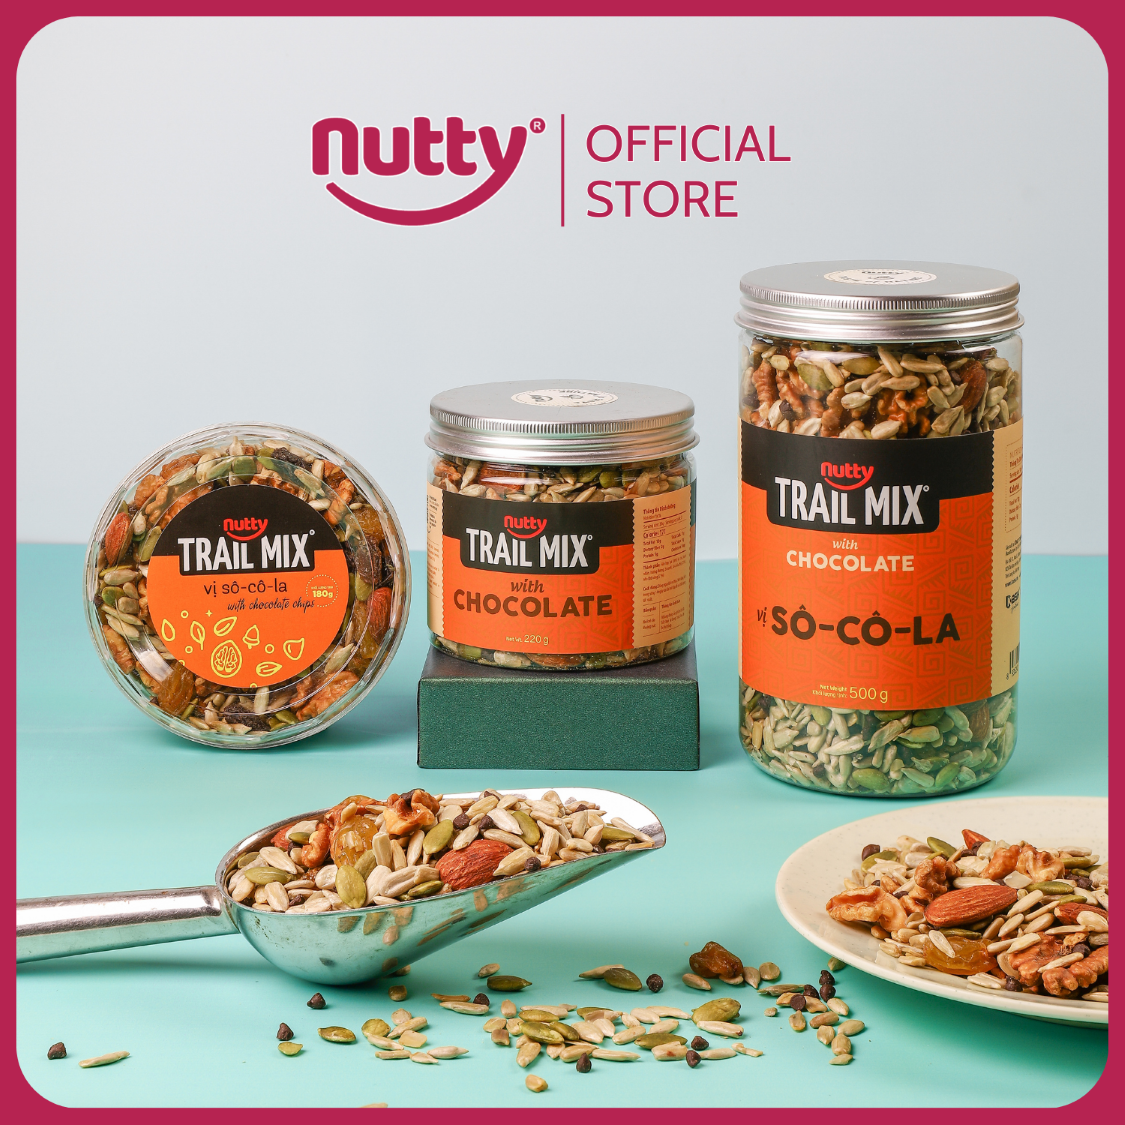 Nutty Trailmix with chocolate - Box 220g 350g 550g